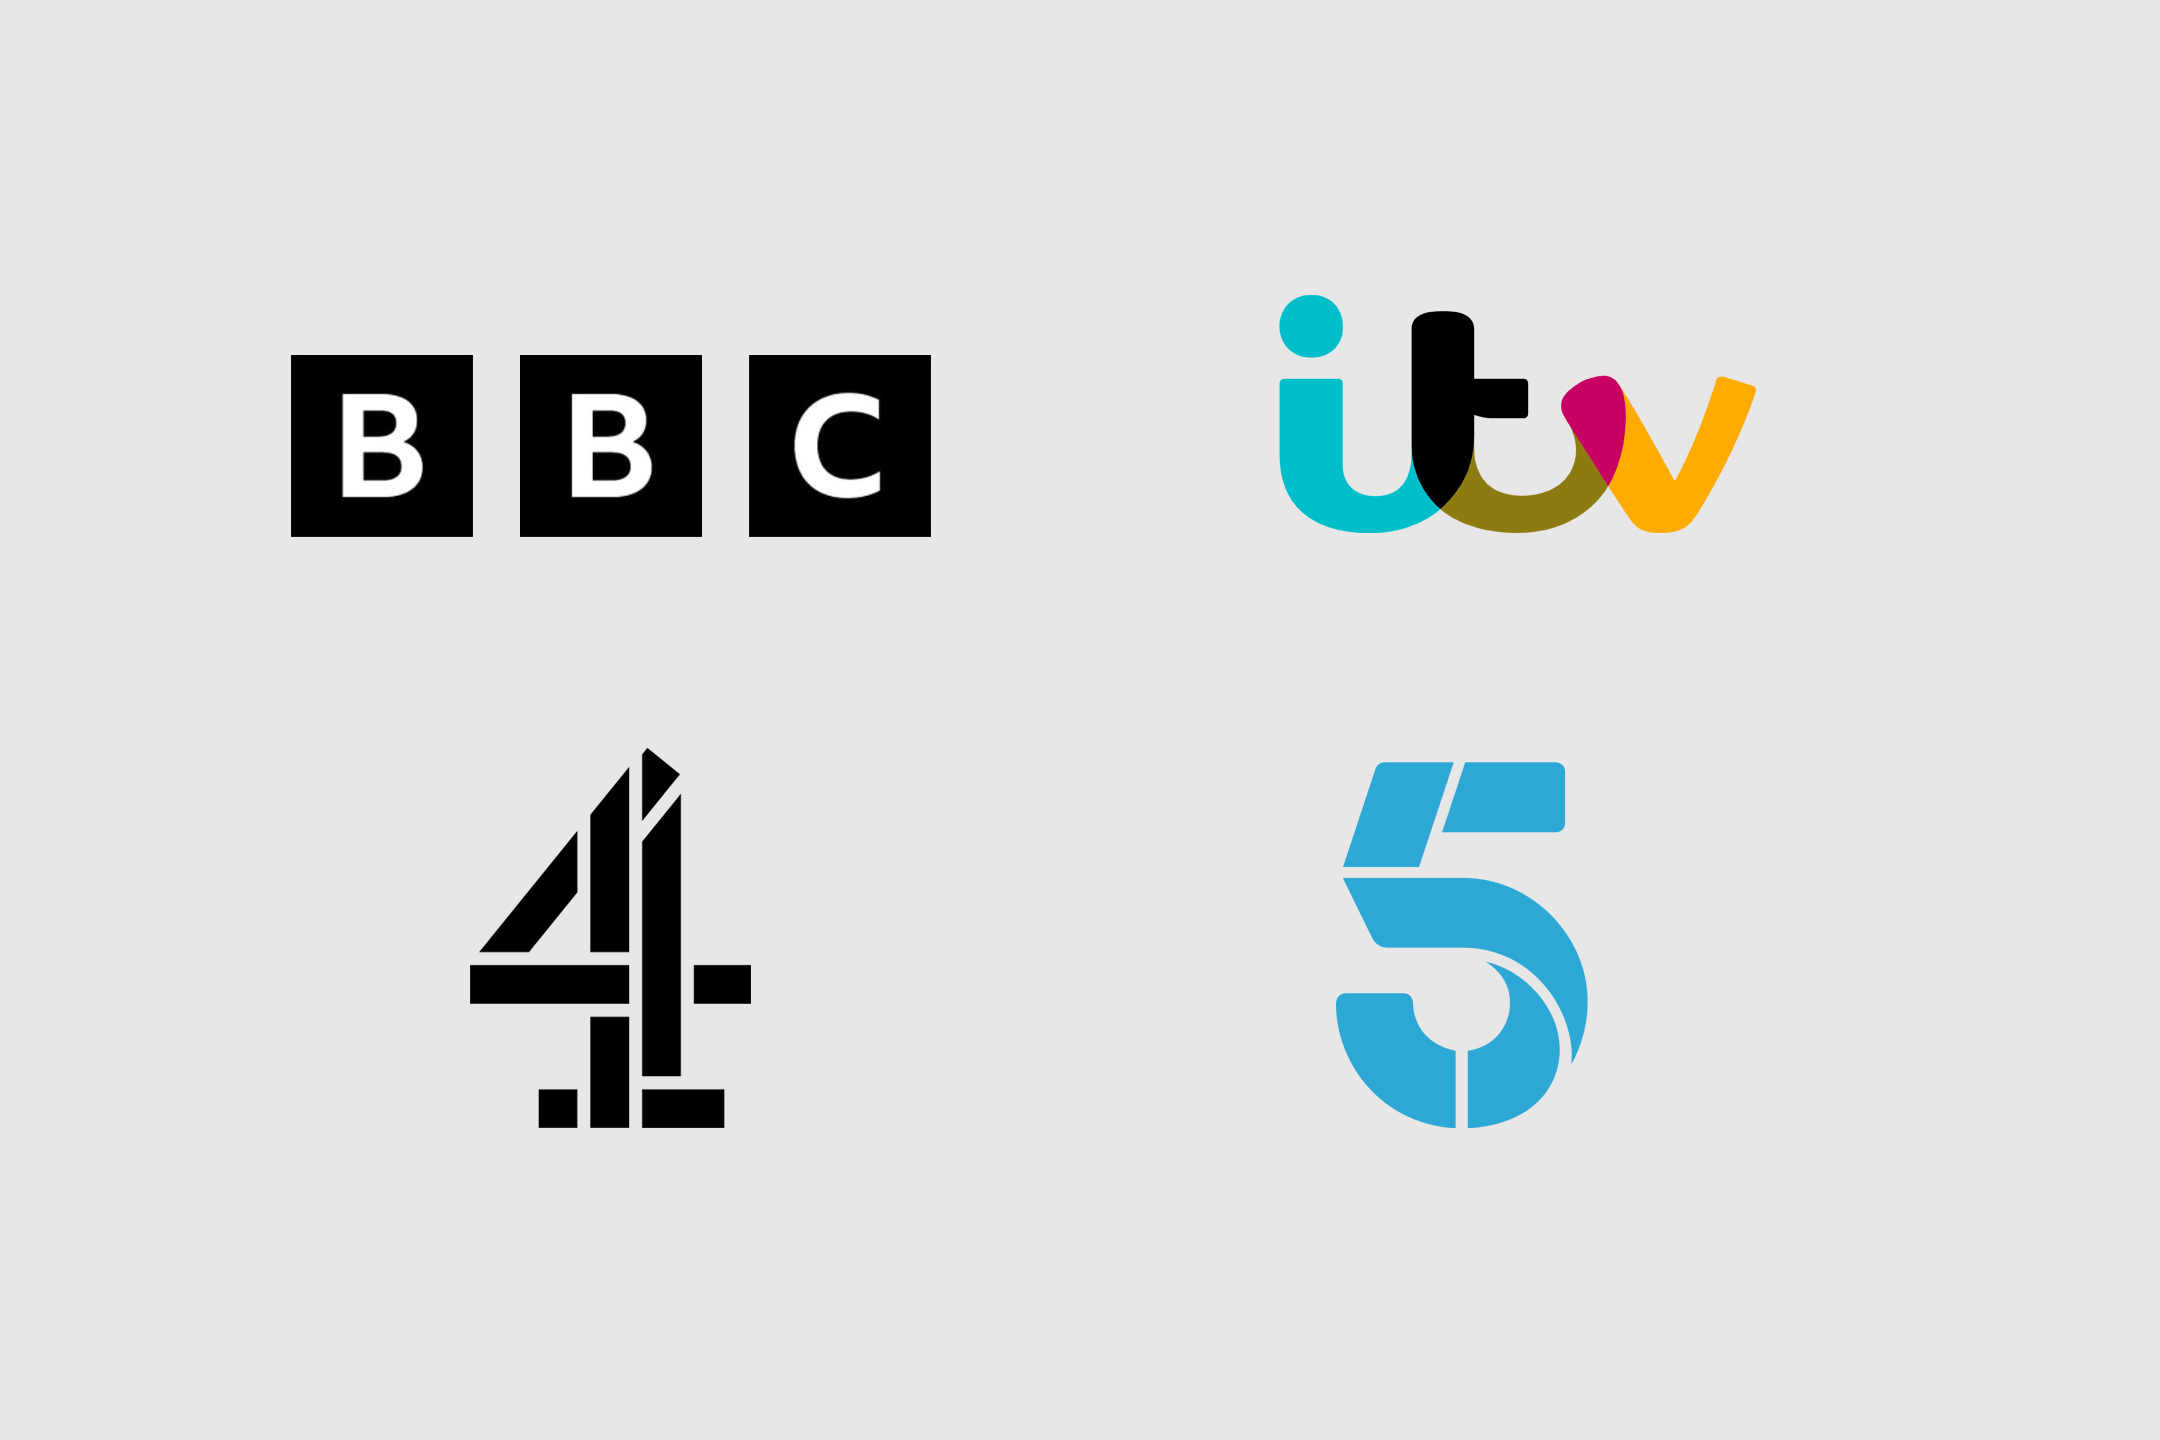 BBC, ITV, Channel 4 and Chanel 5 logos